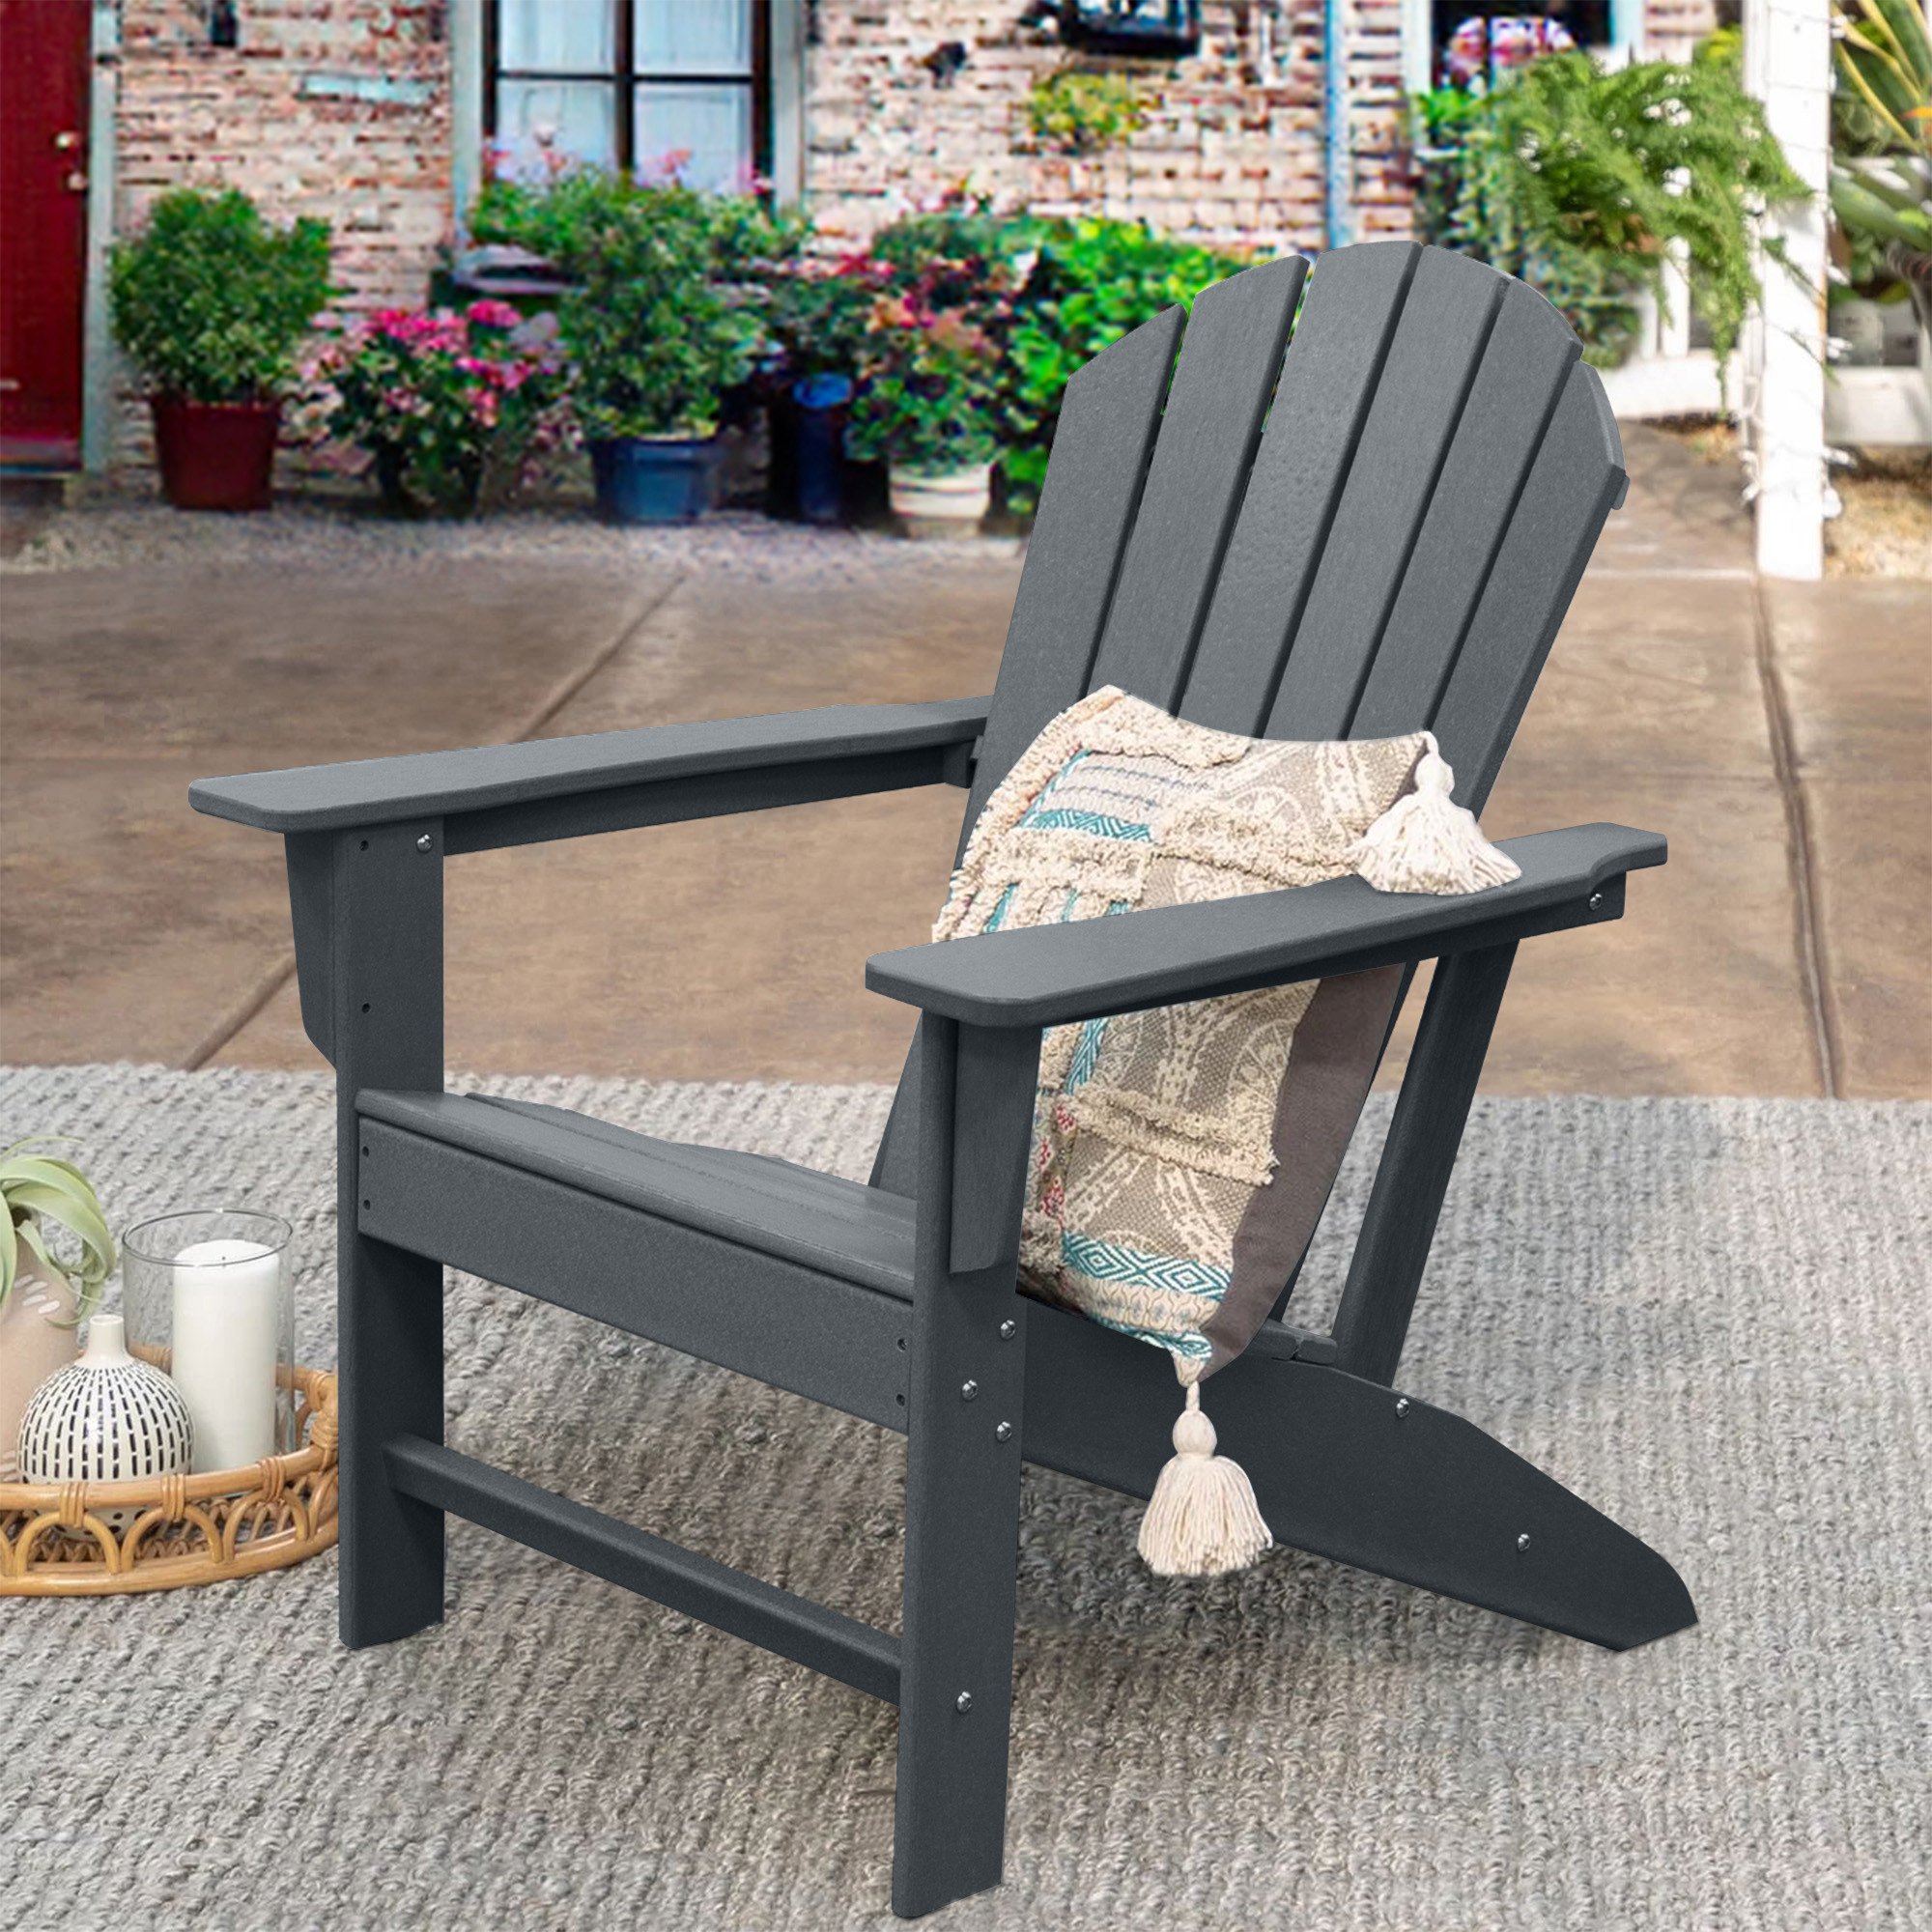 FHFO Outdoor Adirondack Chair,Weather Resistant Plastic Resin Chair for Outside Deck Garden Backyard Balcony（Grey) - image 5 of 6